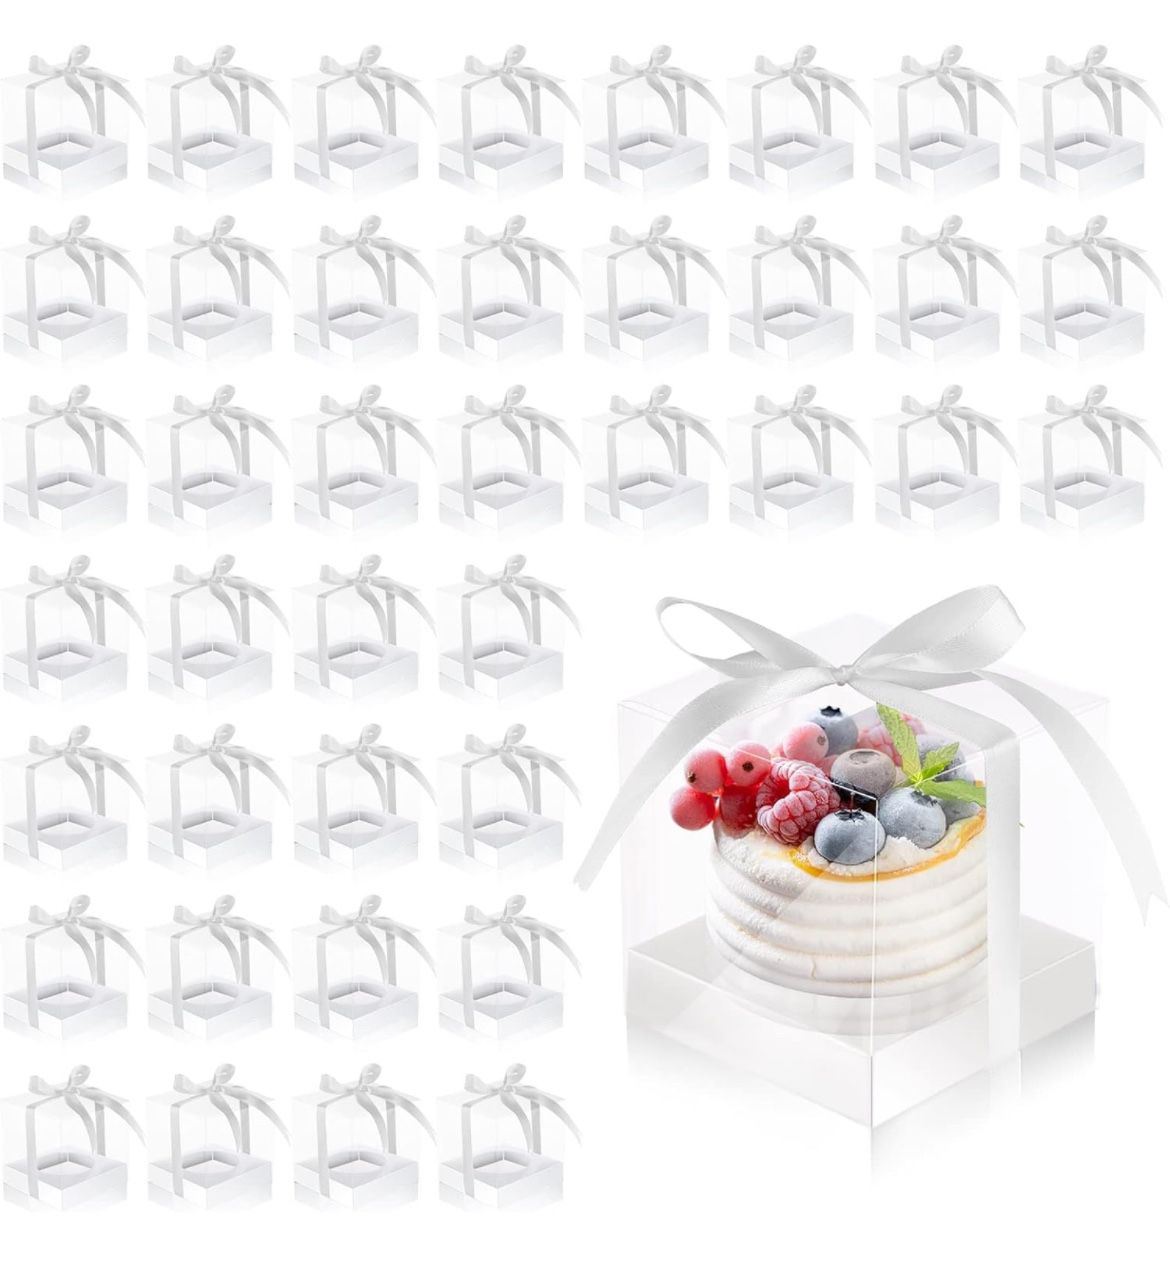 20 Clear Cupcake Boxes Individual 3.5 Inch Plastic Cupcake Containers Single